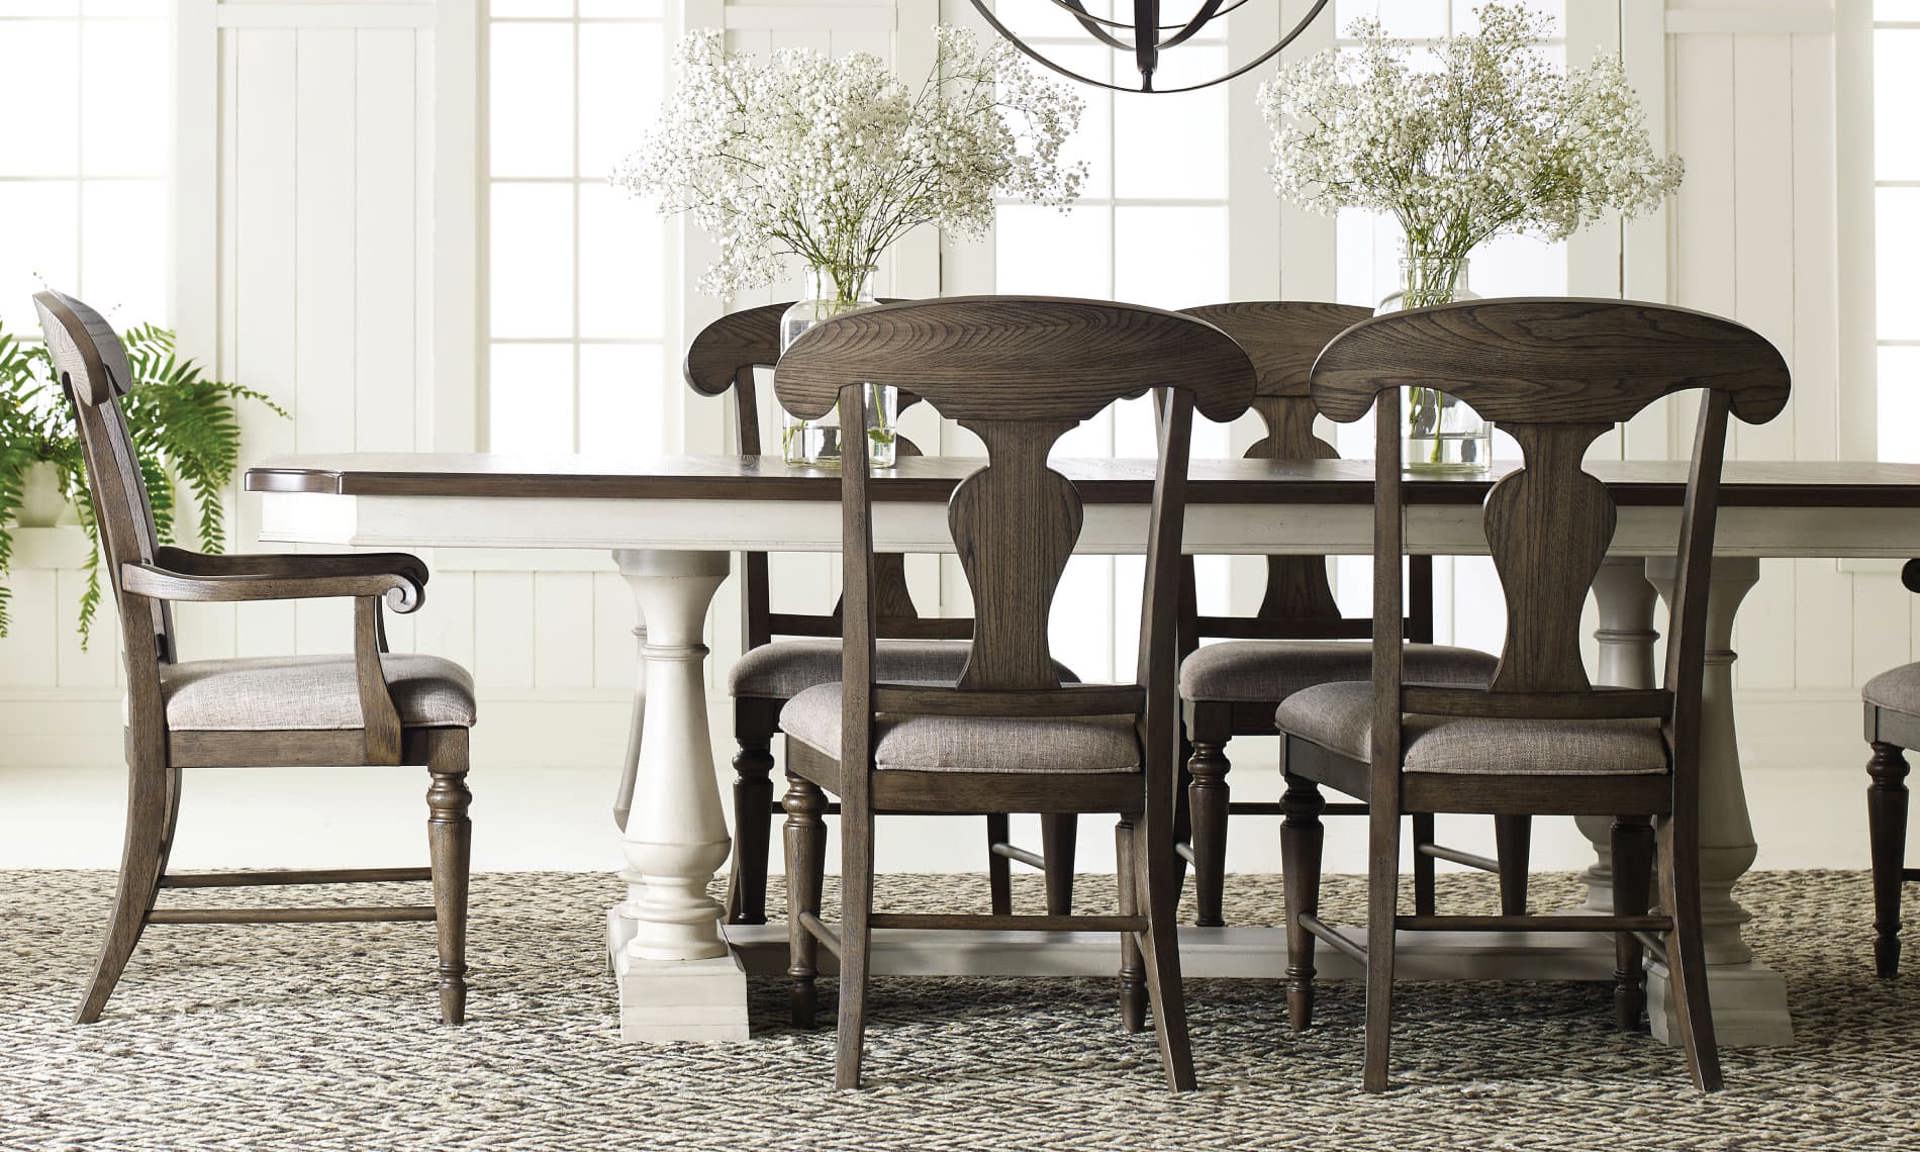 Find the perfect dining room chair by shopping with us. We offer upholstered, solid wood, side chairs, arm chairs and more!